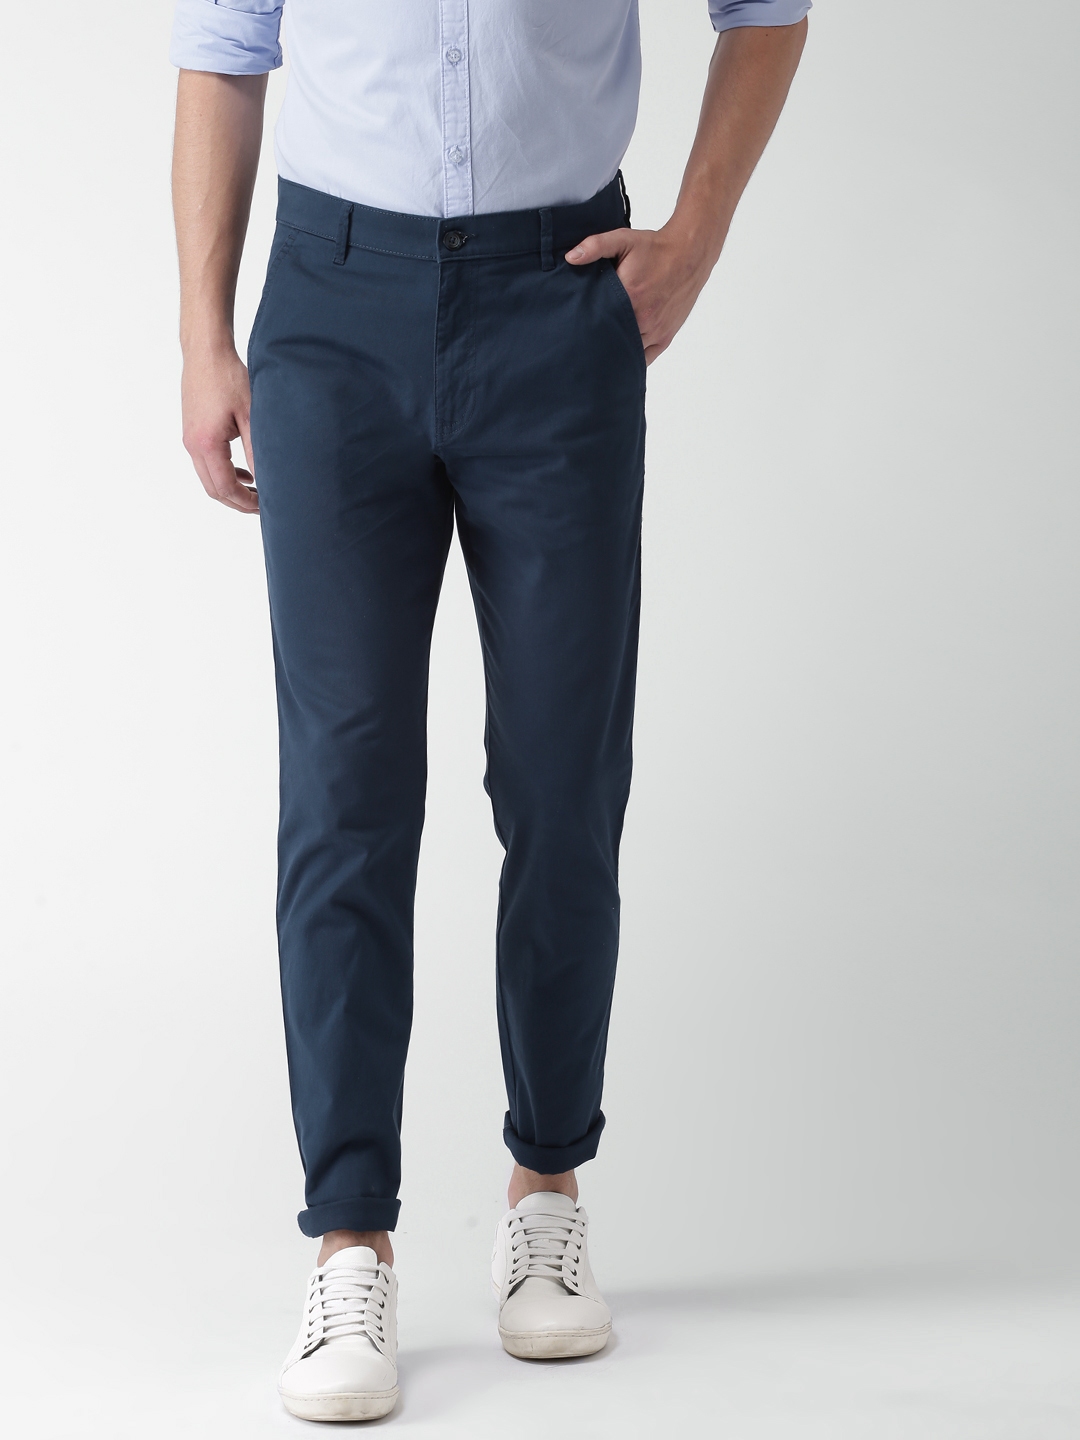 Buy Highlander Blue Chinos - Trousers for Men 1412986 | Myntra